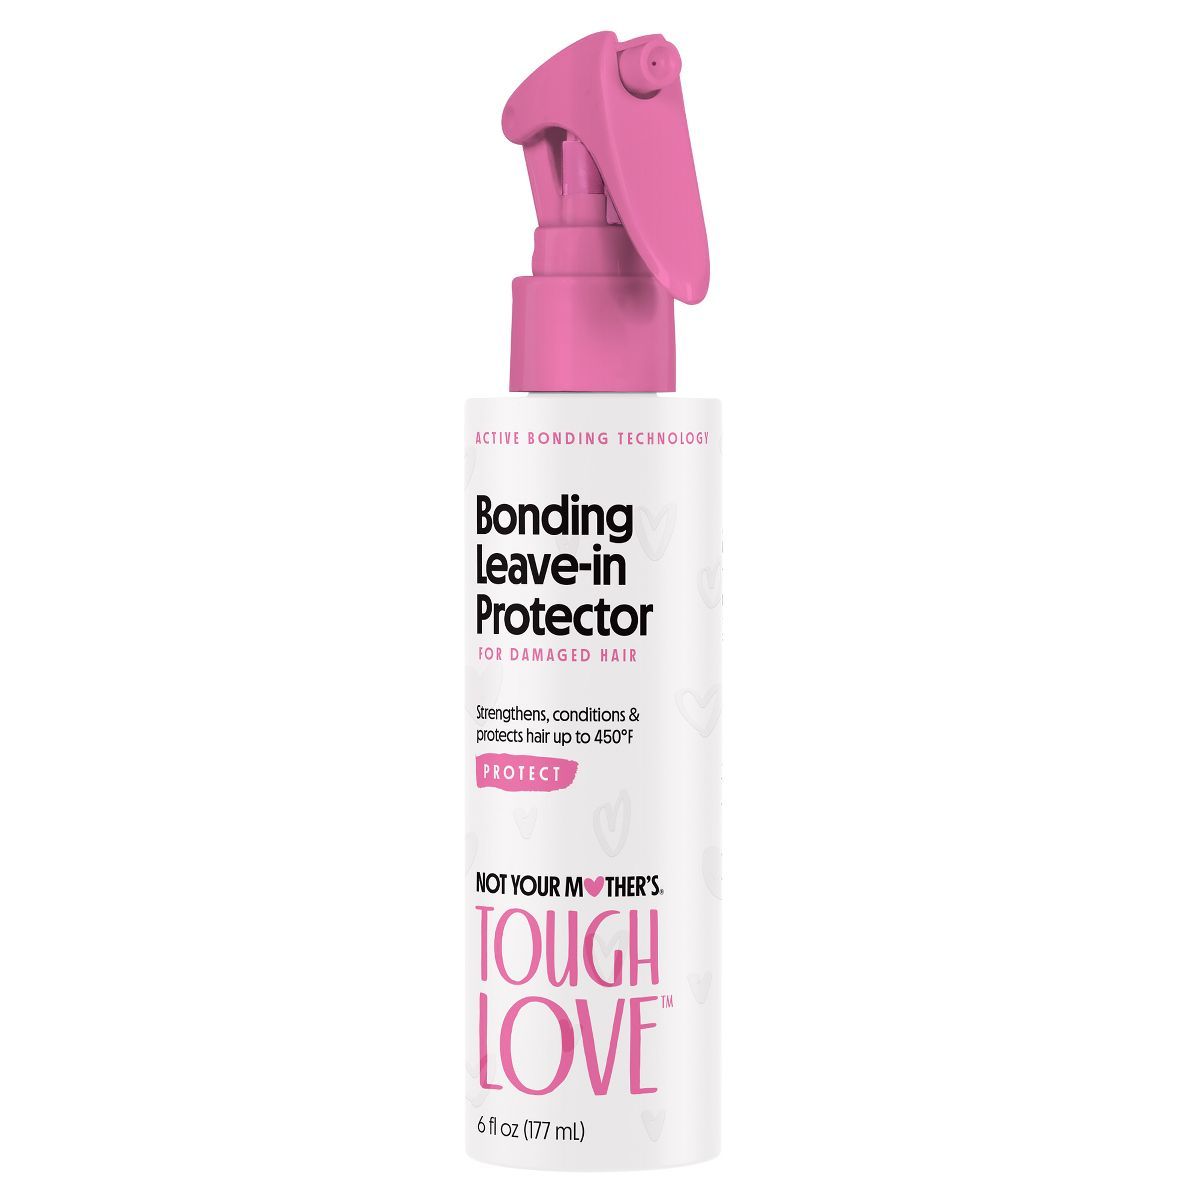 Not Your Mother's Tough Love Bonding Leave-In Hair Protector - 6oz | Target